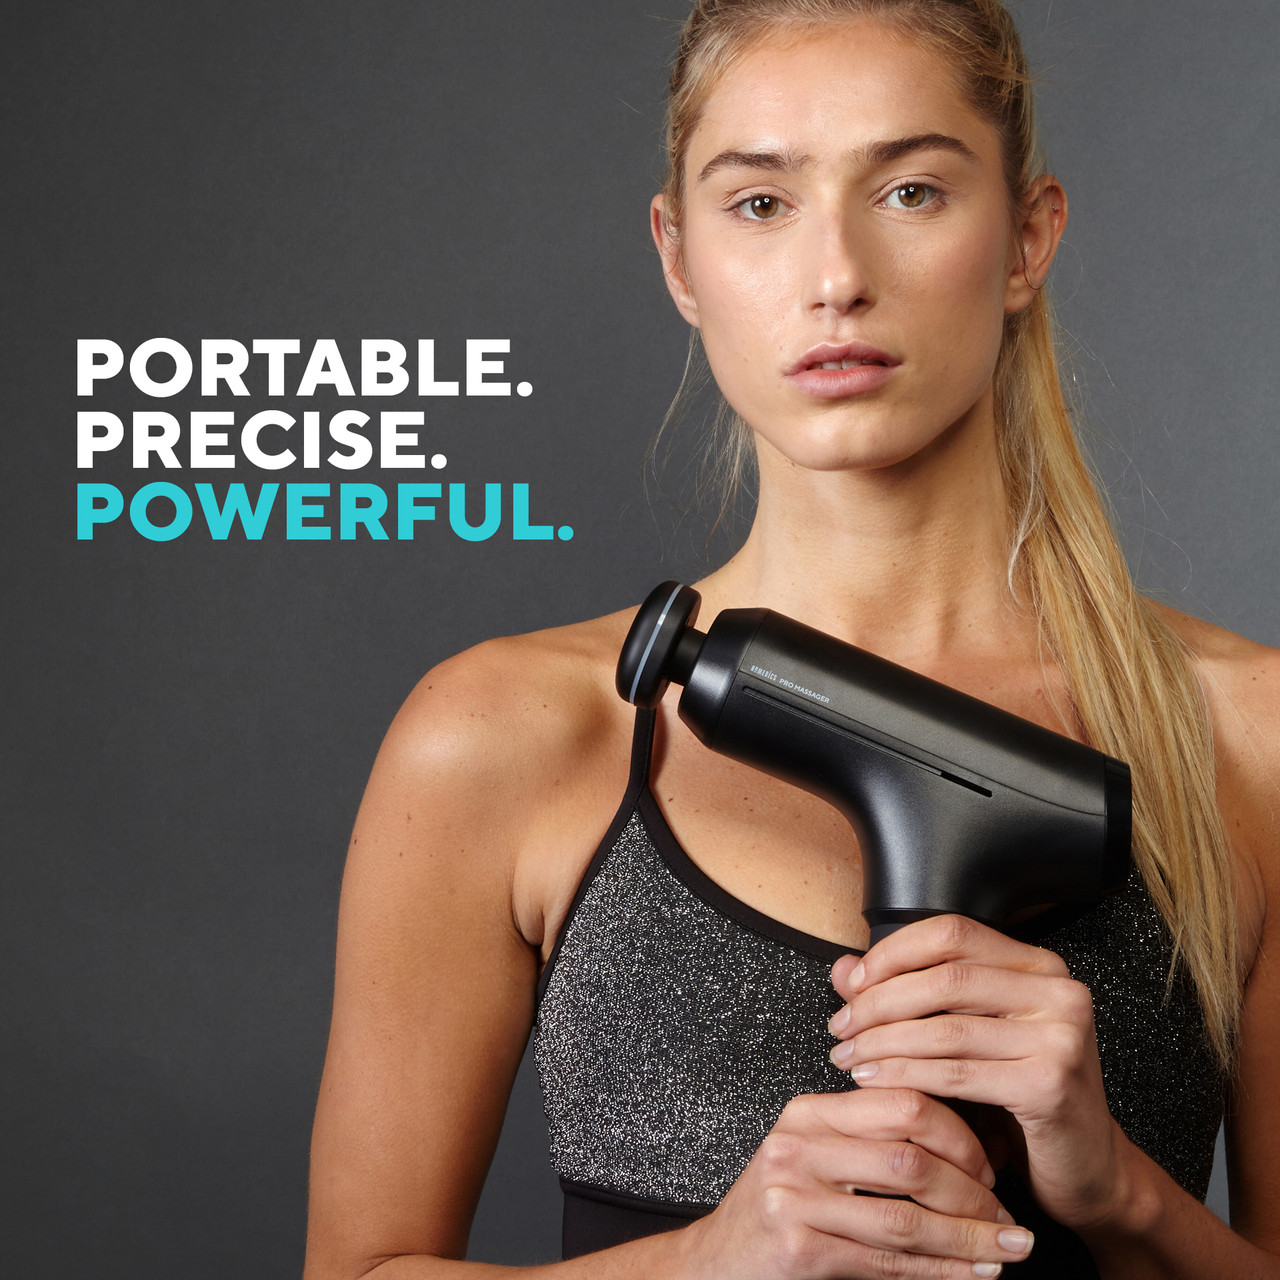 homedics-pro-physiotherapy-massage-gun-health-and-care